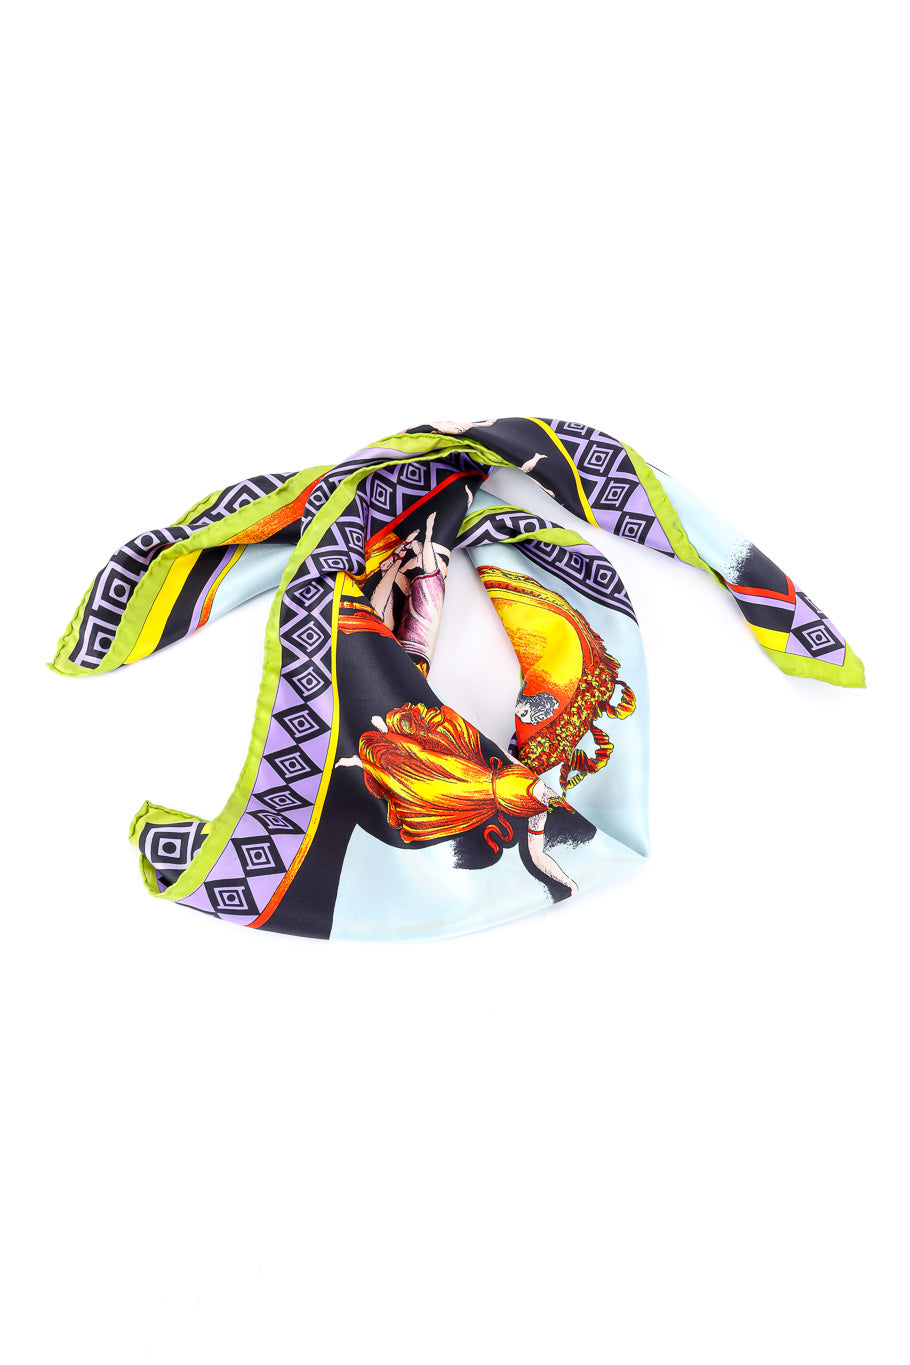 Silk scarf by Gianni Versace flat lay twisted and tied @recessla